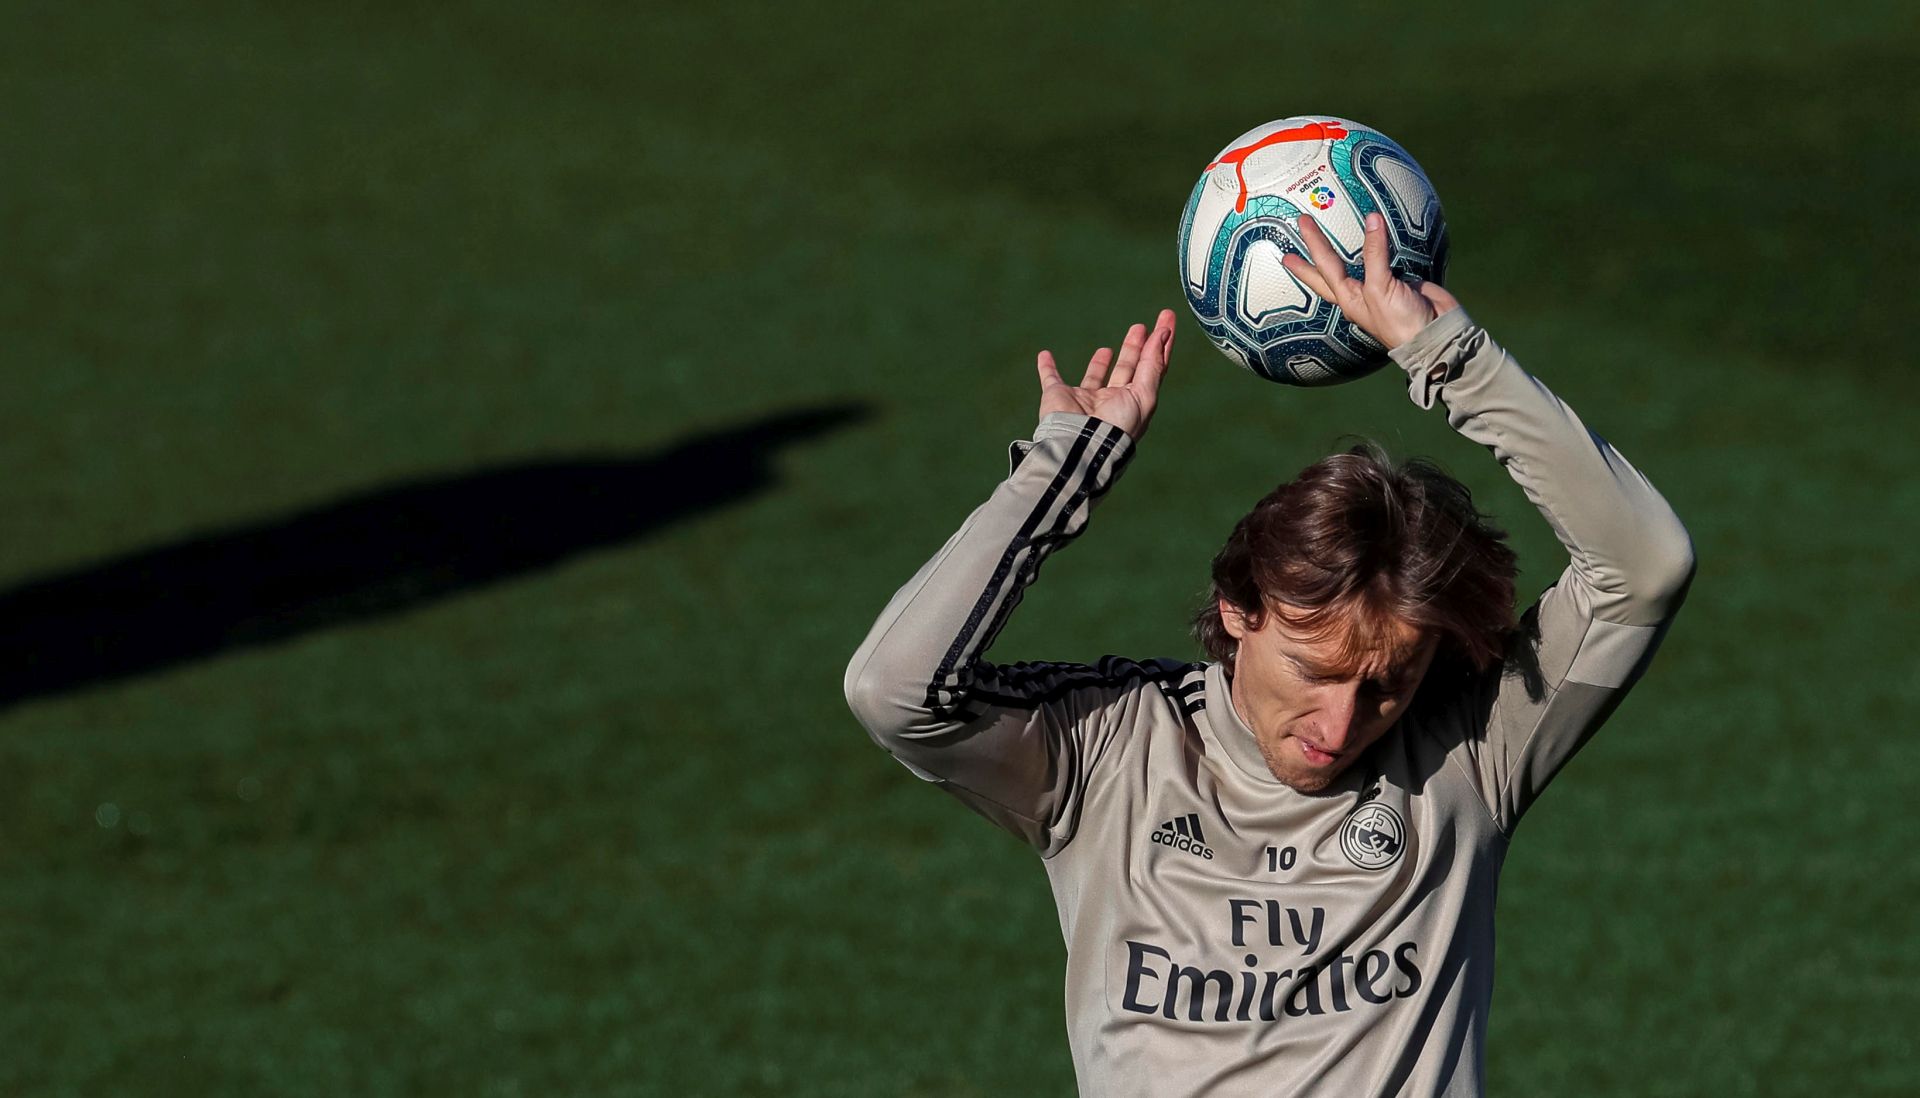 epa08181504 Real Madrid's Luka Modric attends the team's training session in Madrid, Spain, 31 January 2020. Real Madrid will be facing Atletico Madrid in a Spanis Primera Division LaLiga soccer match on 01 February 2020.  EPA/Emilio Naranjo